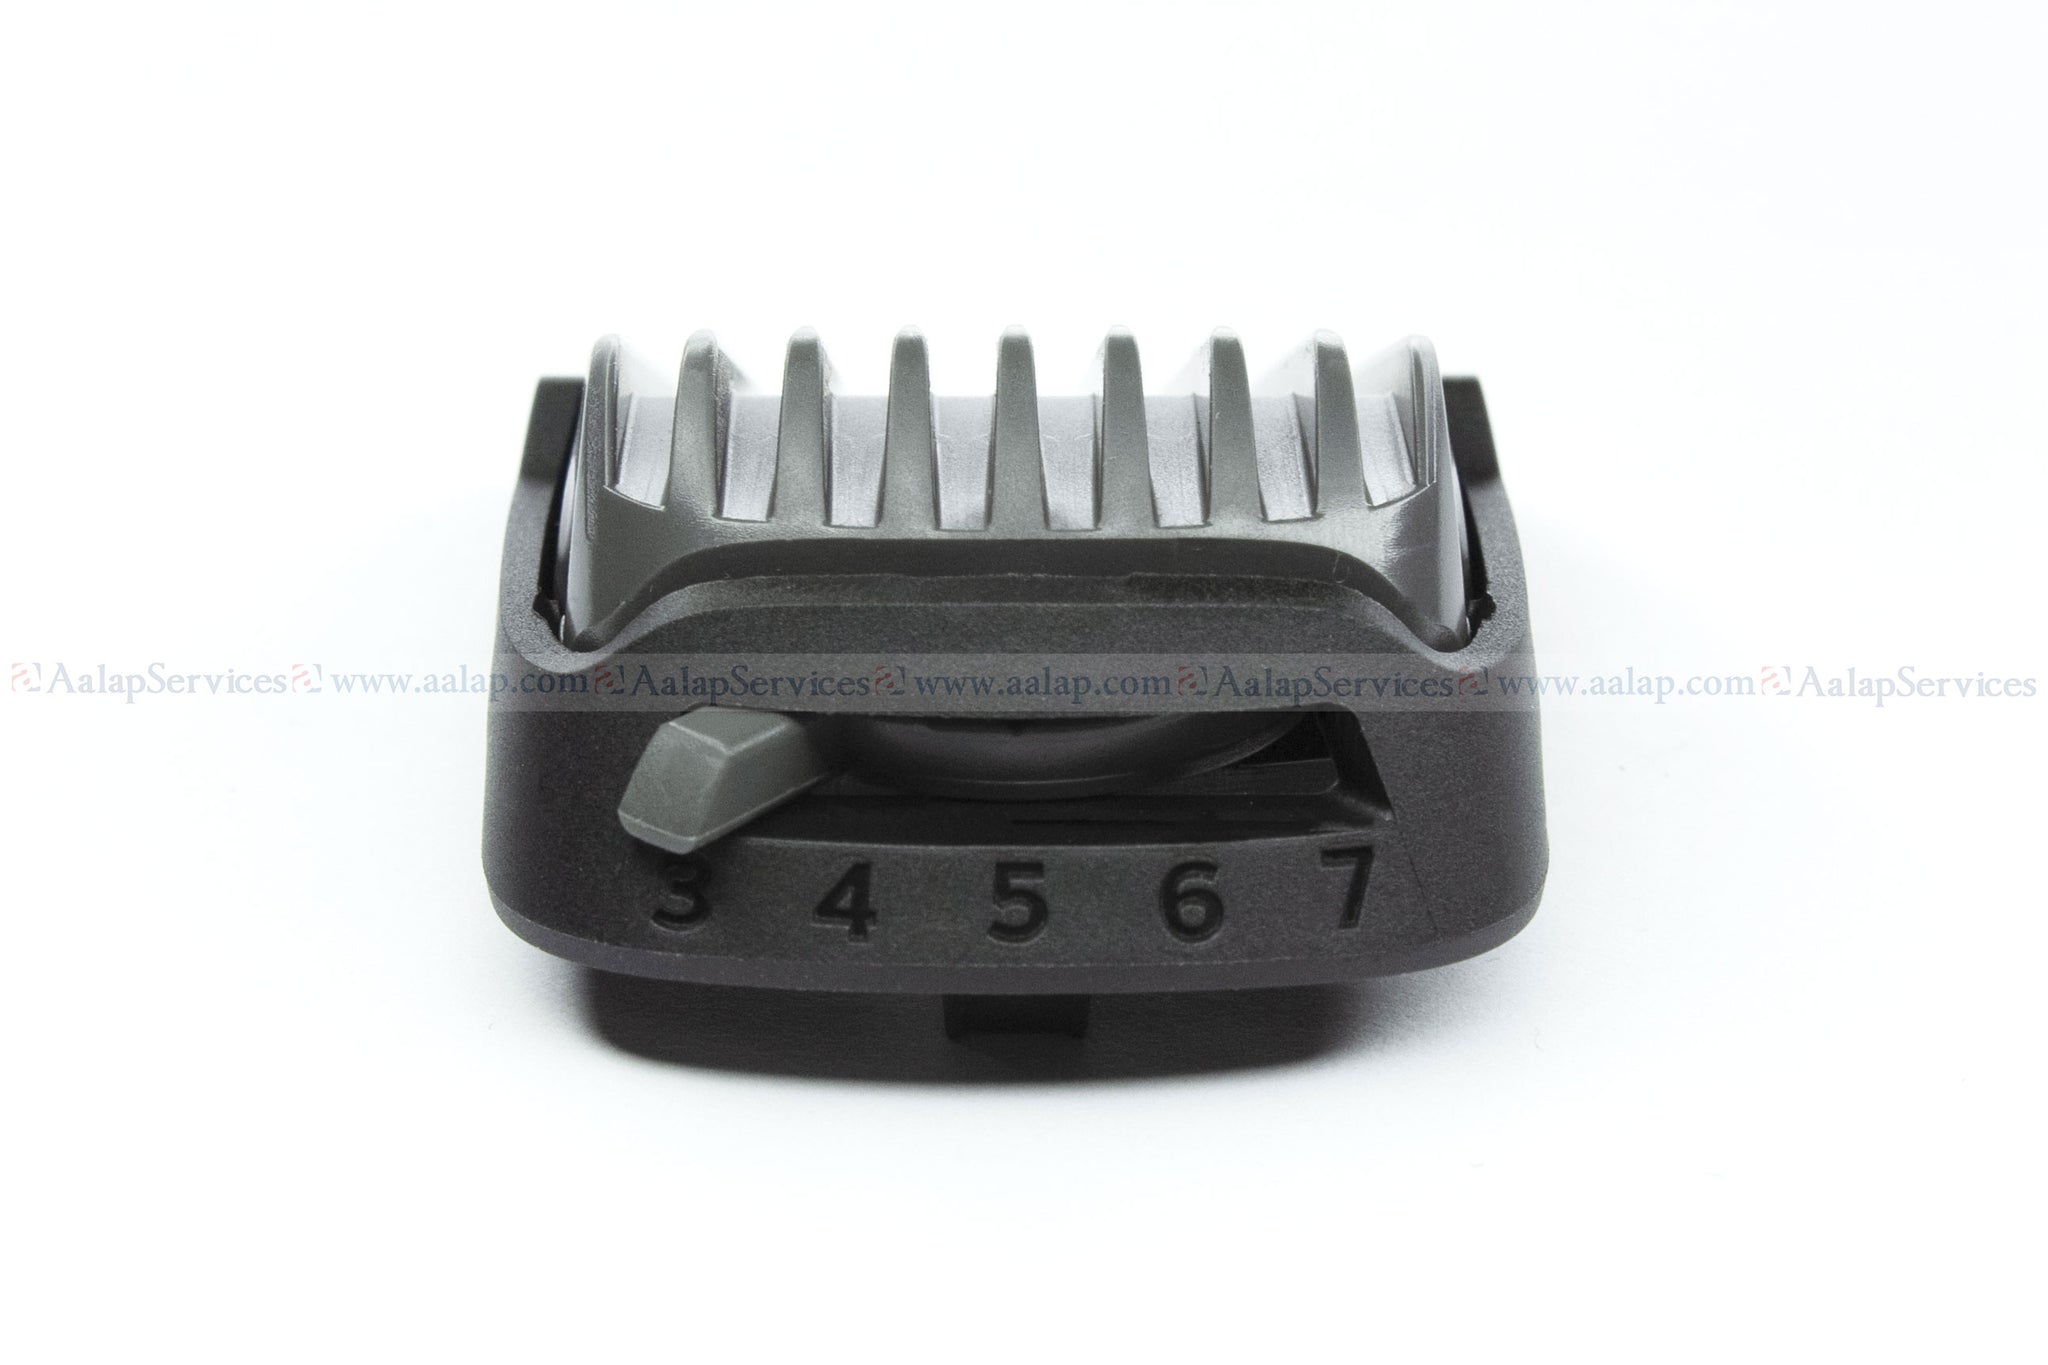 philips one blade combs 7mm